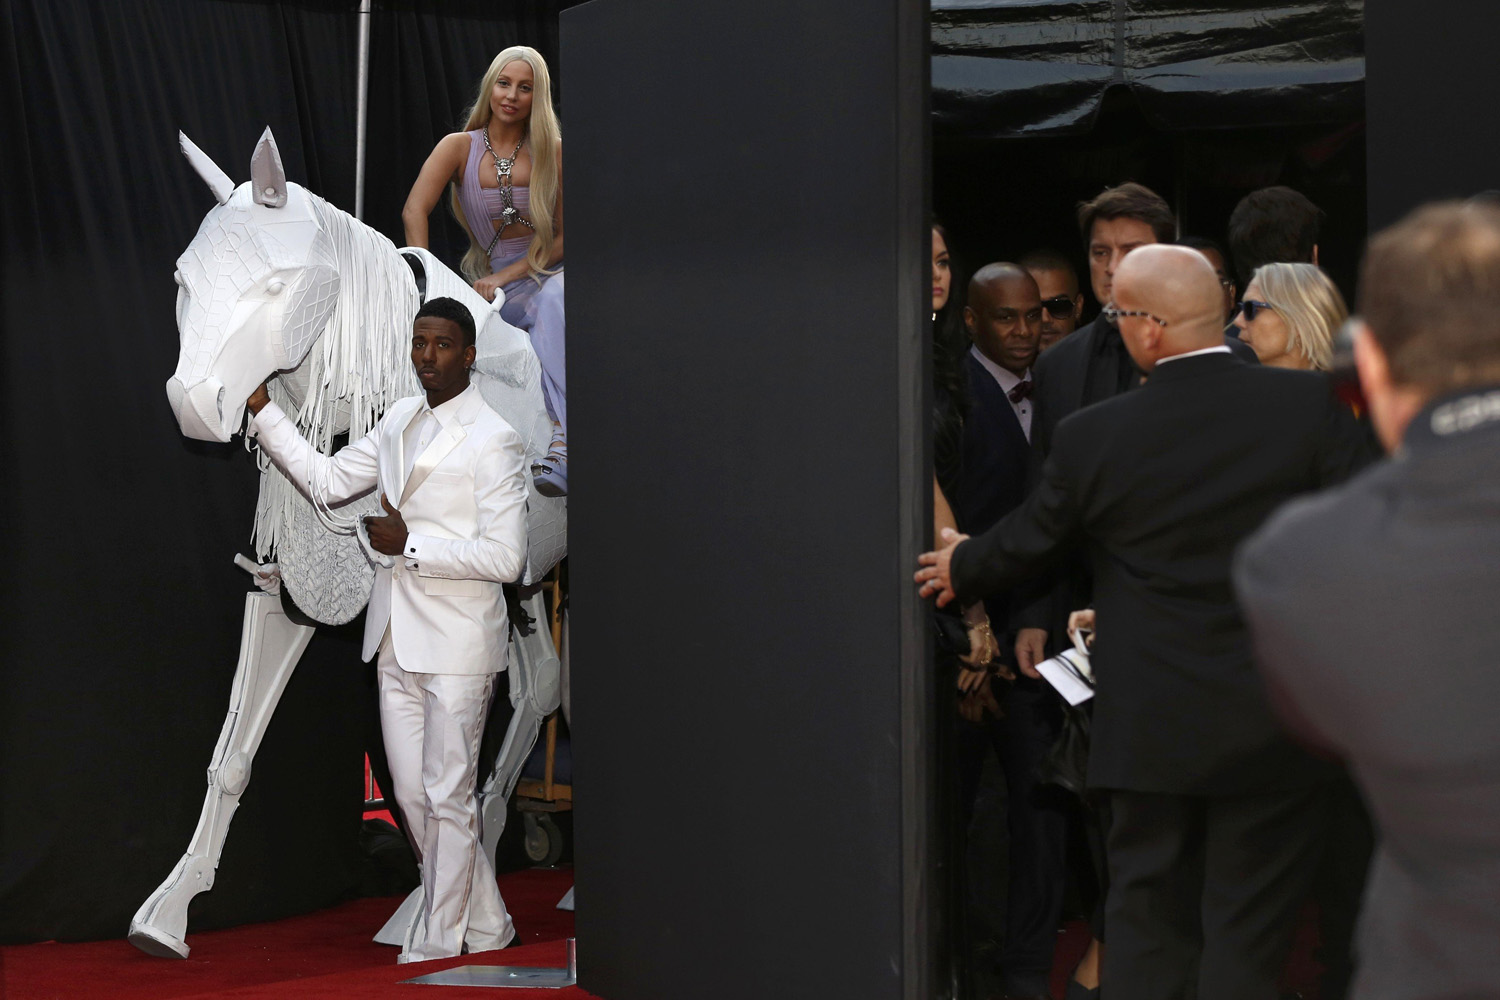 Nov. 24, 2013. Musician Lady Gaga arrives atop a horse puppet at the 41st American Music Awards in Los Angeles, Calif.